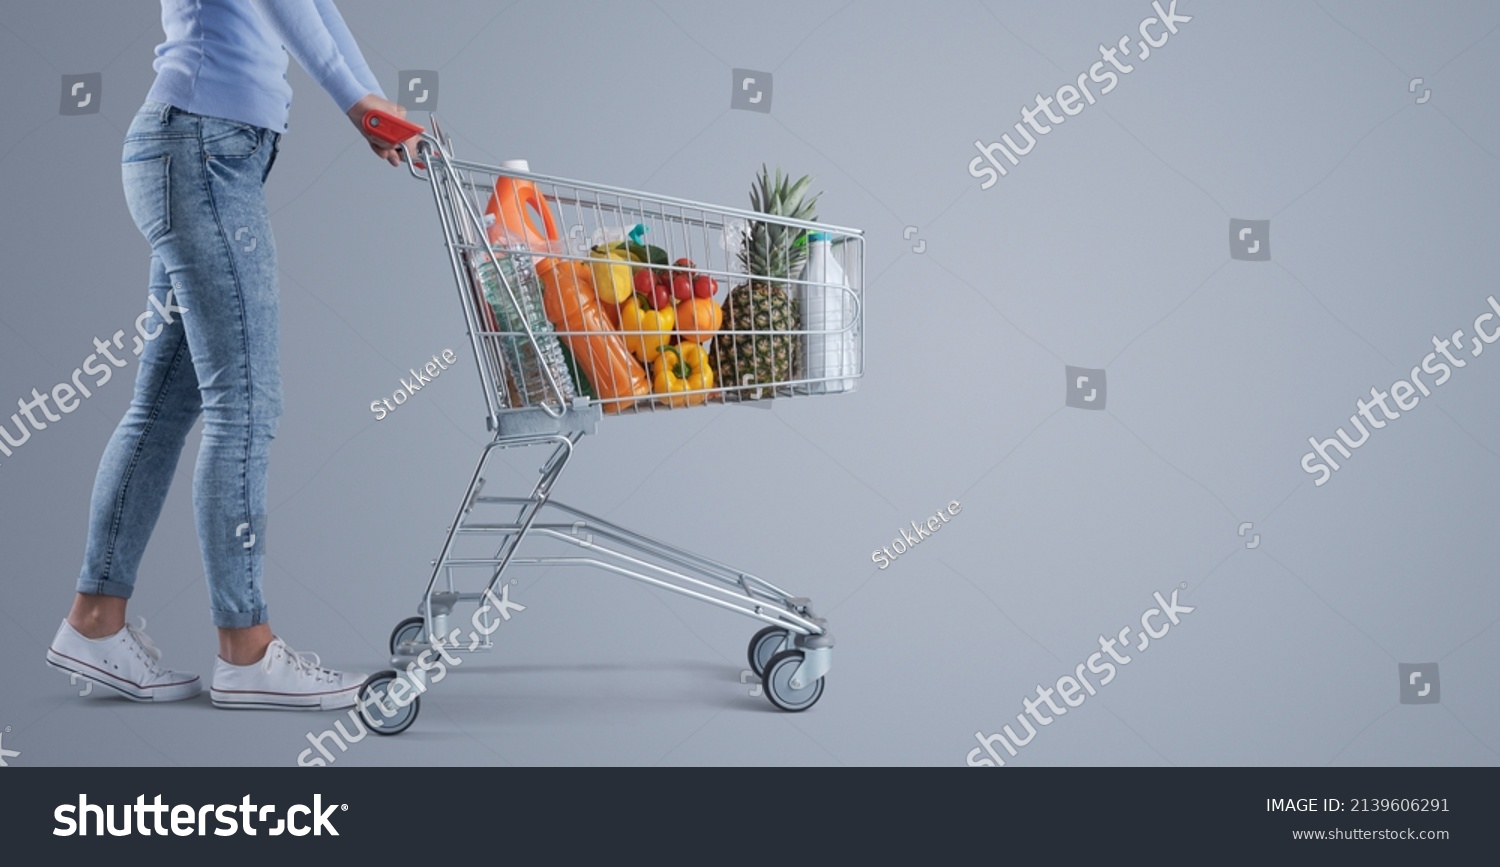 Young woman pushing a full shopping cart, supermarket and grocery shopping banner, blank copy space #2139606291